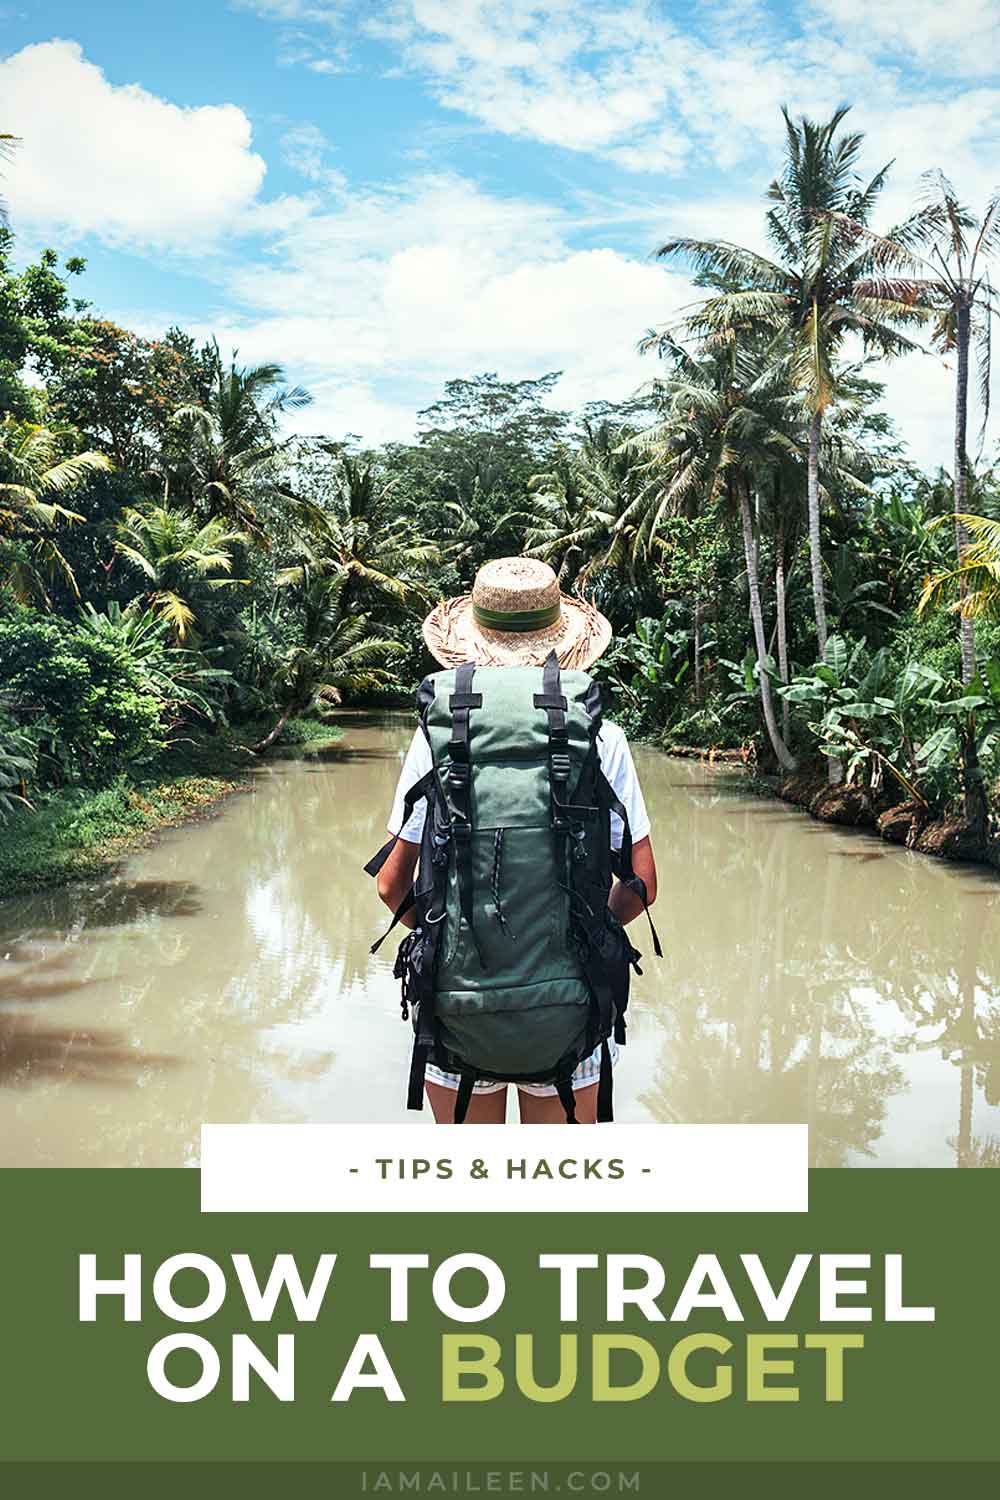 How to Travel on a Budget (or For FREE): Top Money-Saving Tips & Hacks